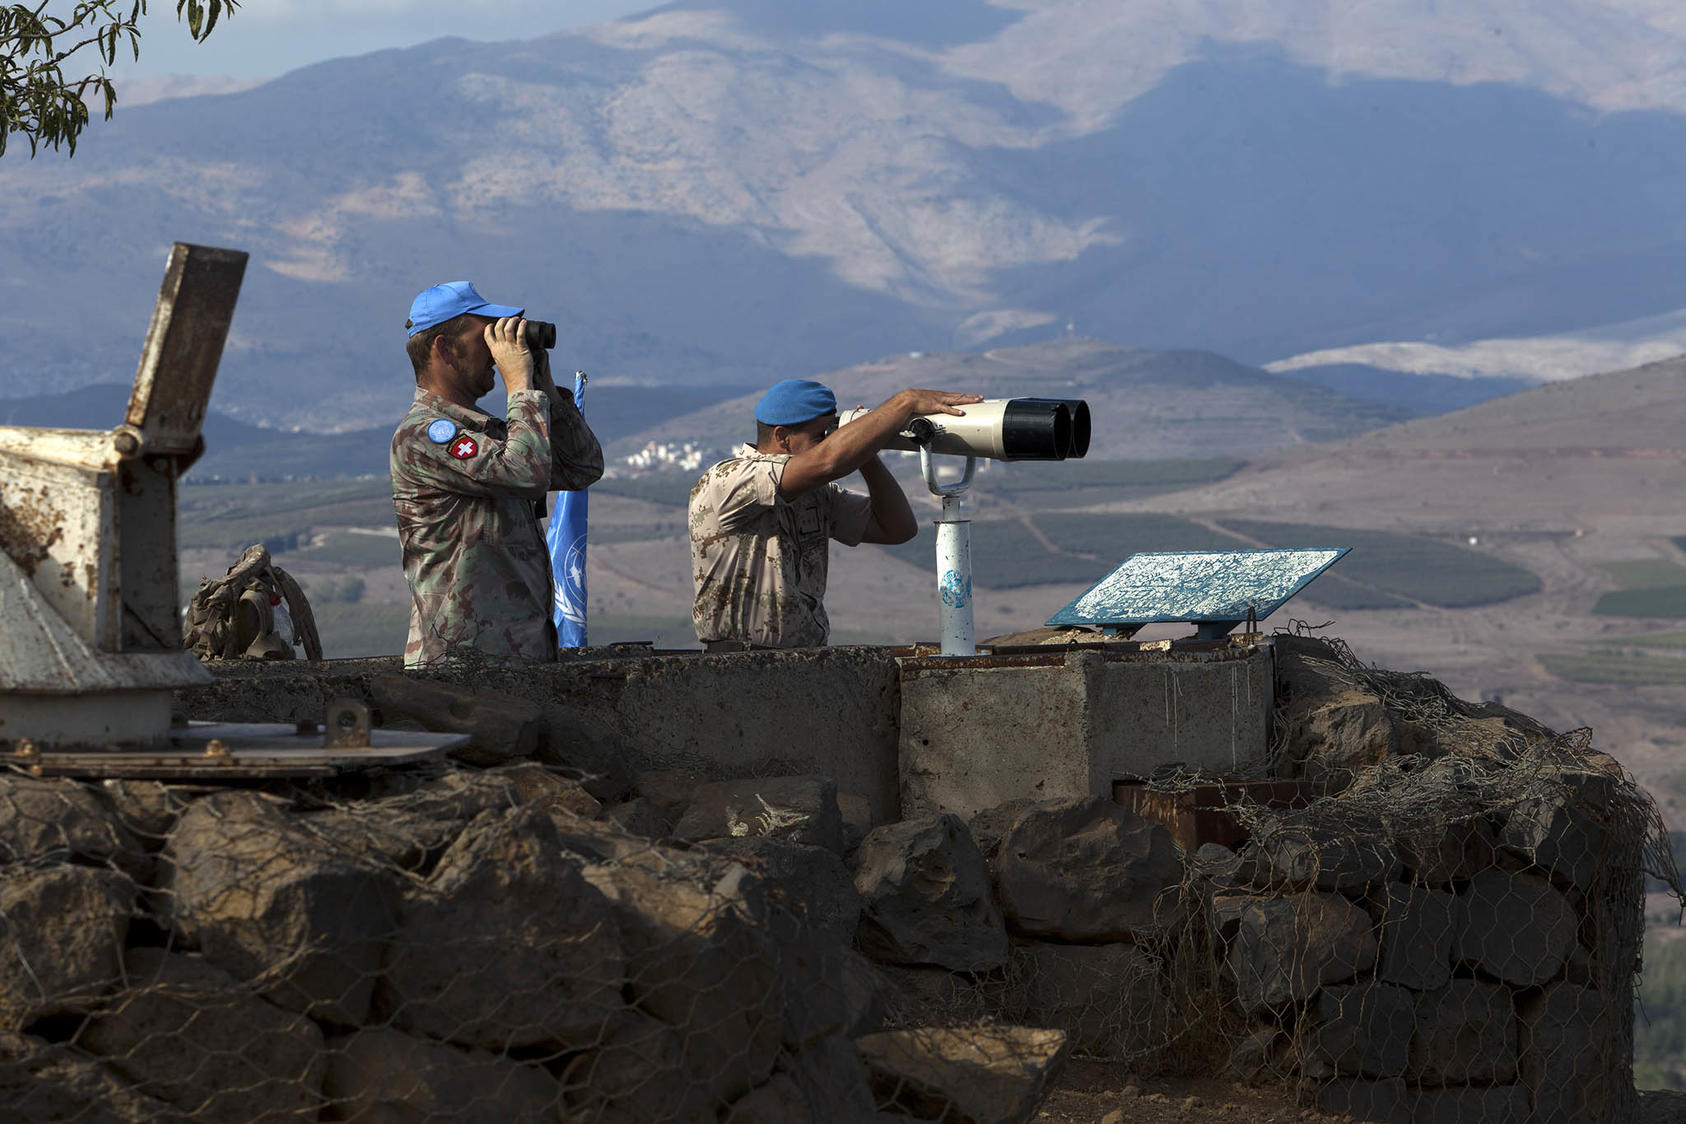 A U.N. team in Israeli-controlled Golan Heights, Sept. 29, 2014. A secret 2009-2011 U.S. mediation effort aimed to have Israel return the Golan Heights to Syria in exchange for Damascus’ strategic reorientation. (Rina Castelnuovo/The New York Times)